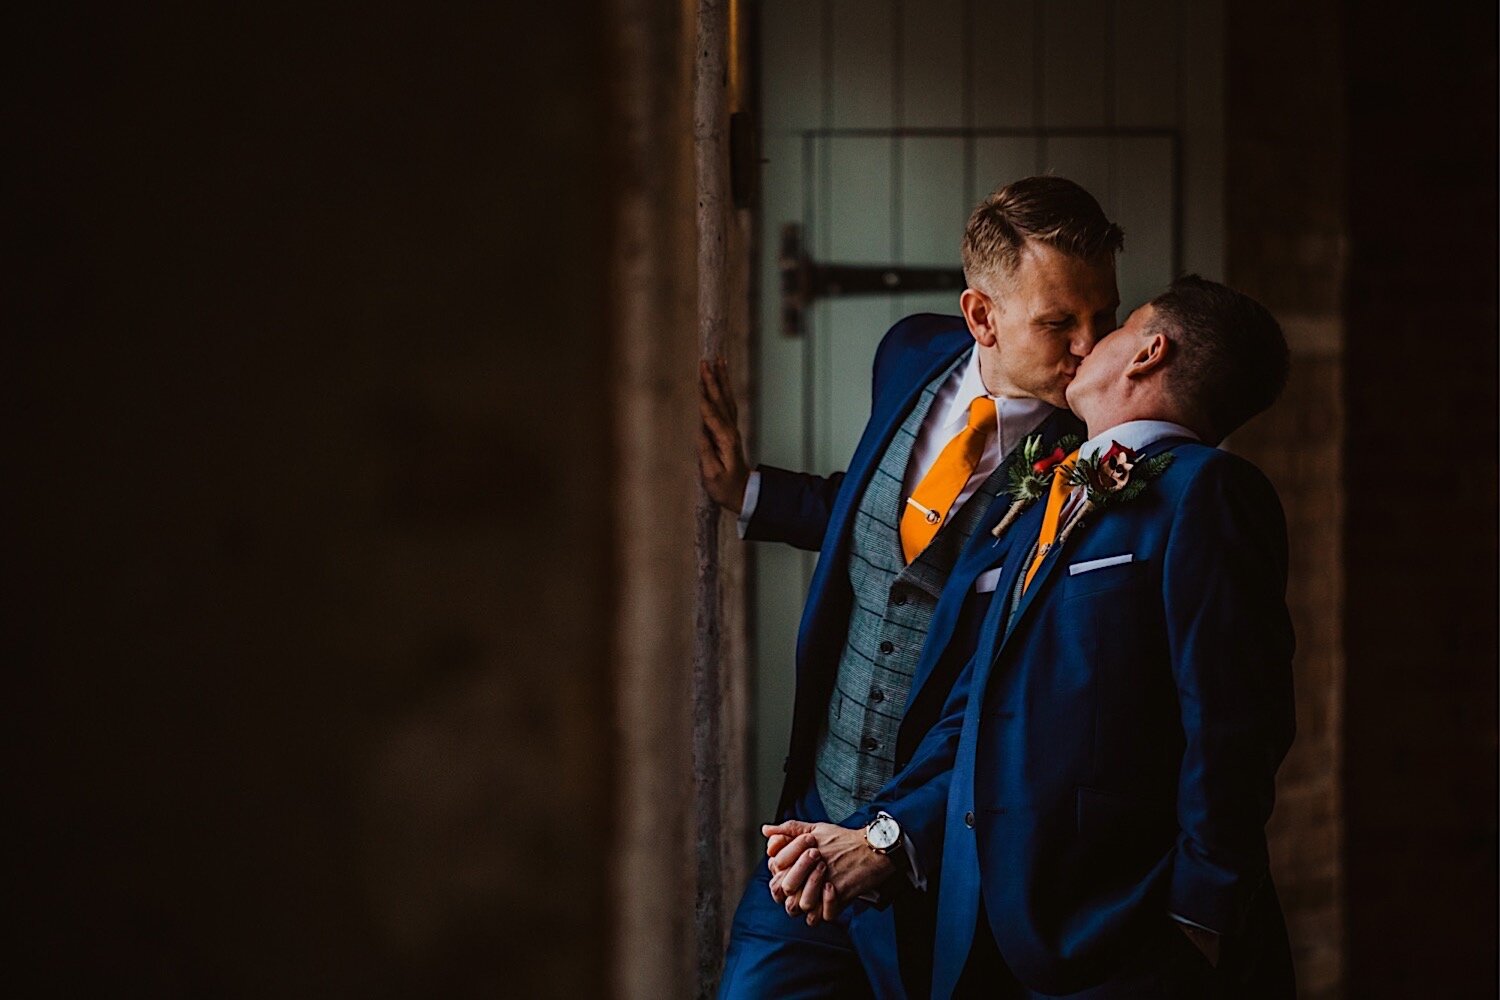 55_TWS-202_photographer_wedding_industrial_venue_gay_grooms_photography_chic_westmill_derby.jpg